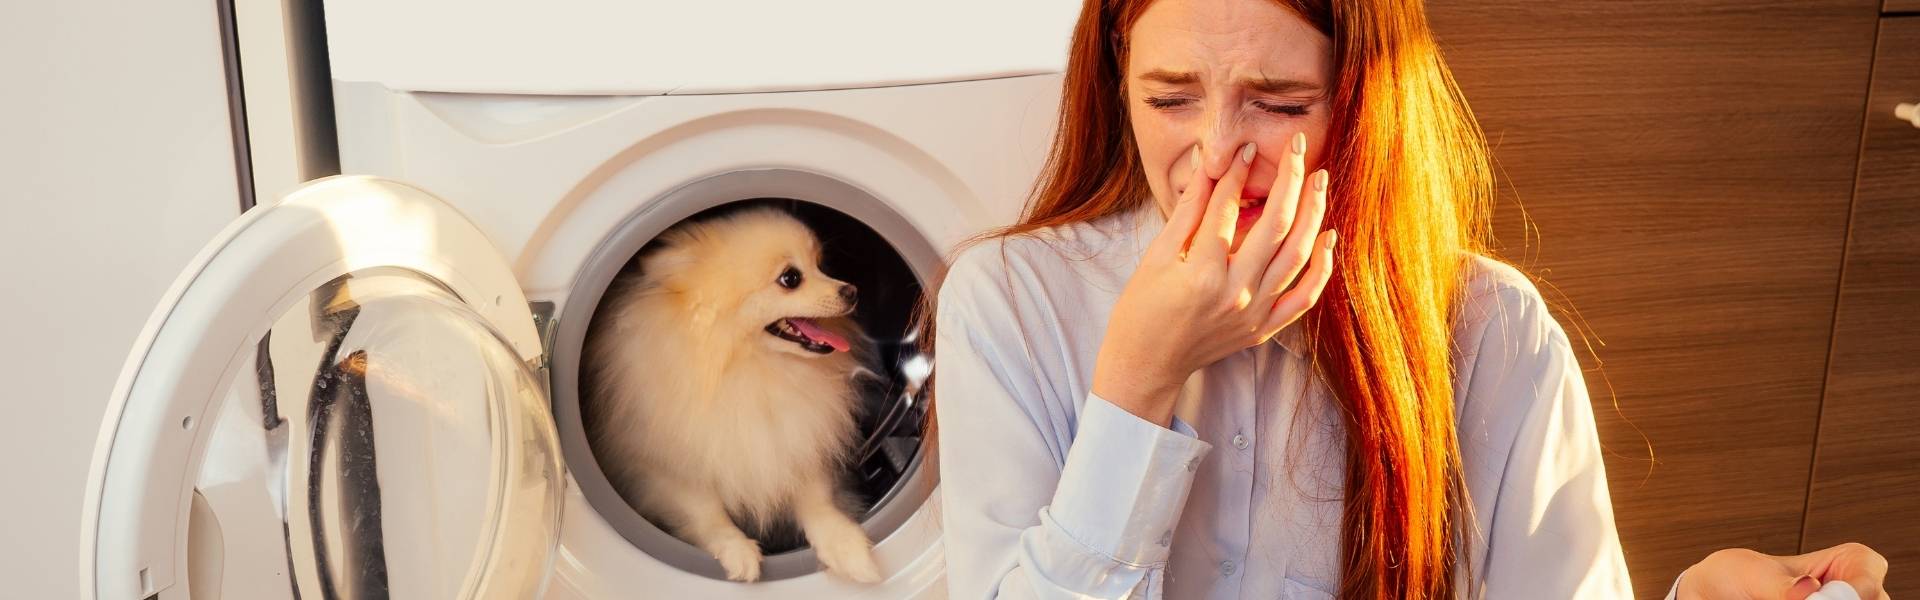 Revealed: The secret to odour-free laundry when you have pets